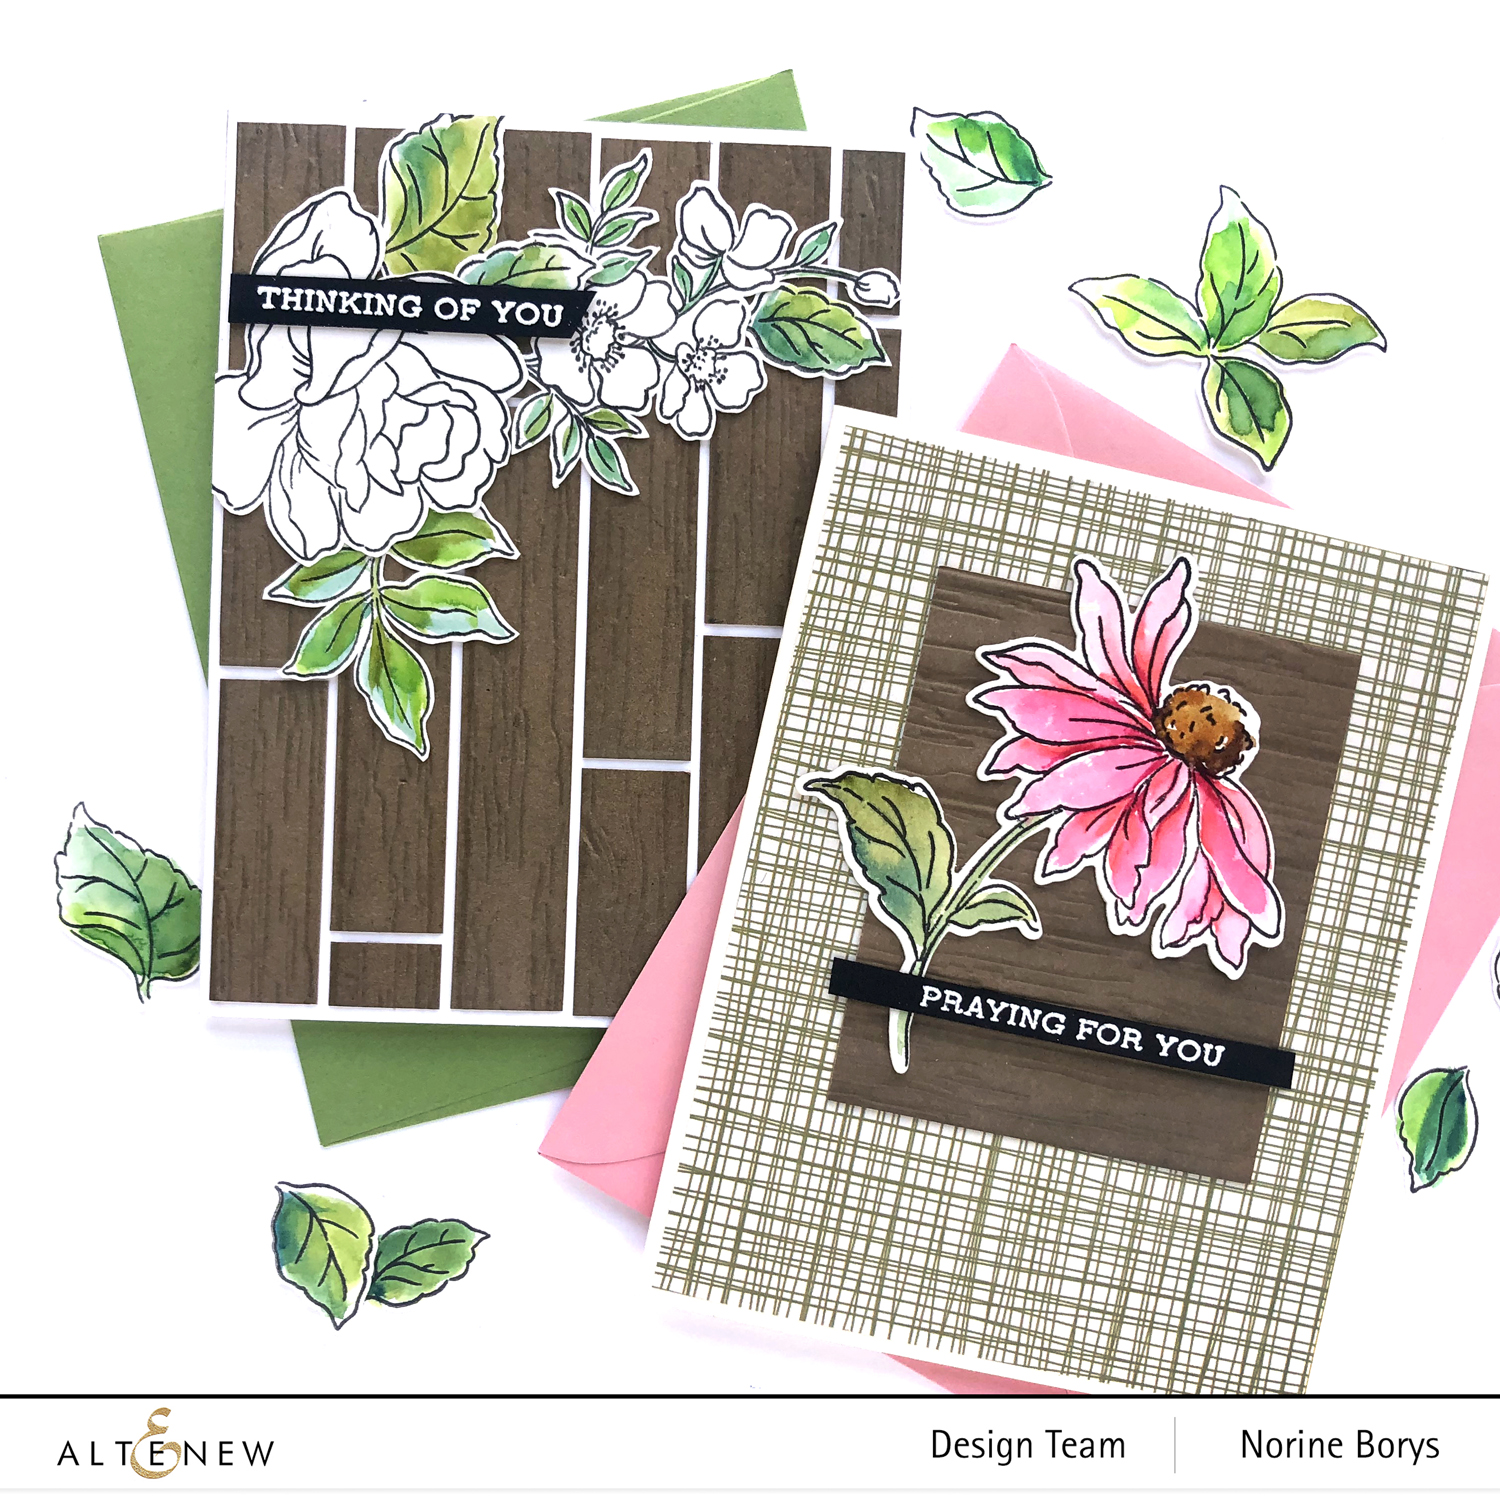 Altenew Classic Imagery Collection Release Blog Hop + Giveaway ...